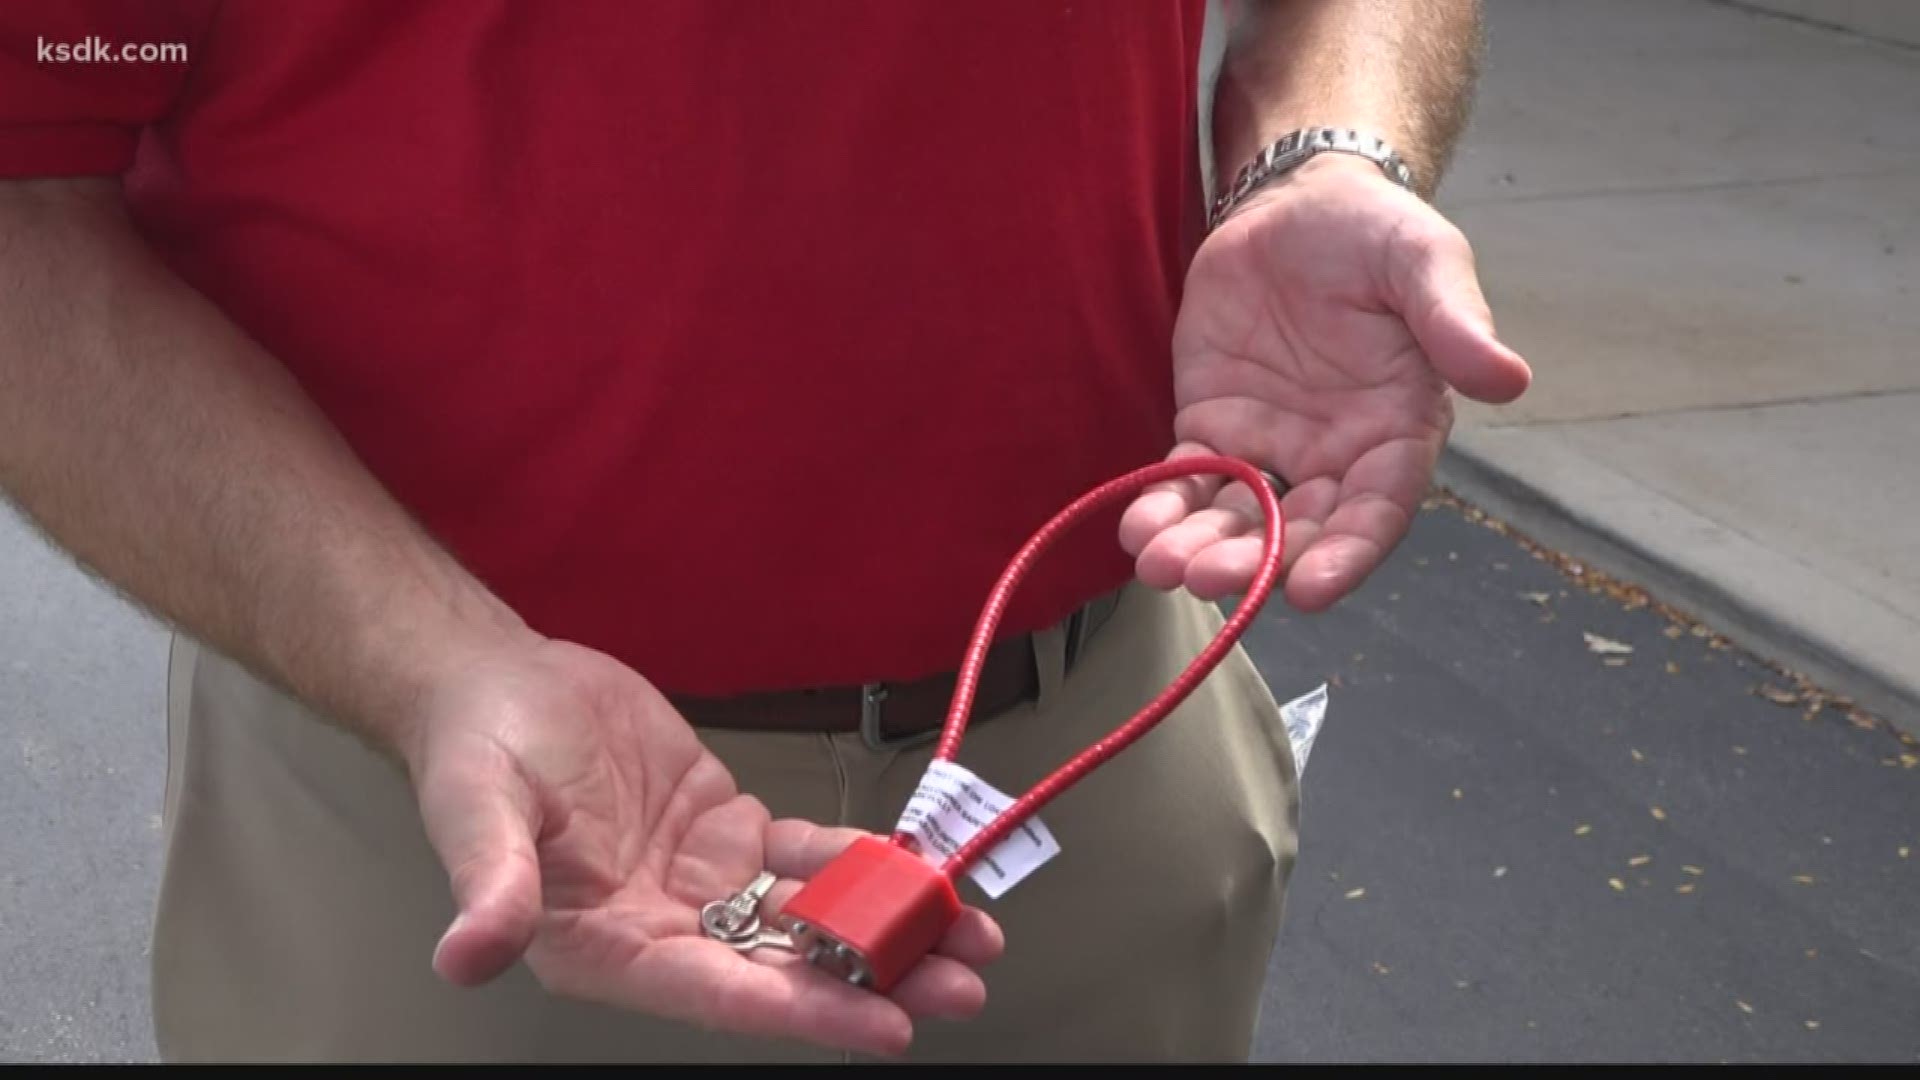 The locks are 100 percent effective in preventing accidental shootings.